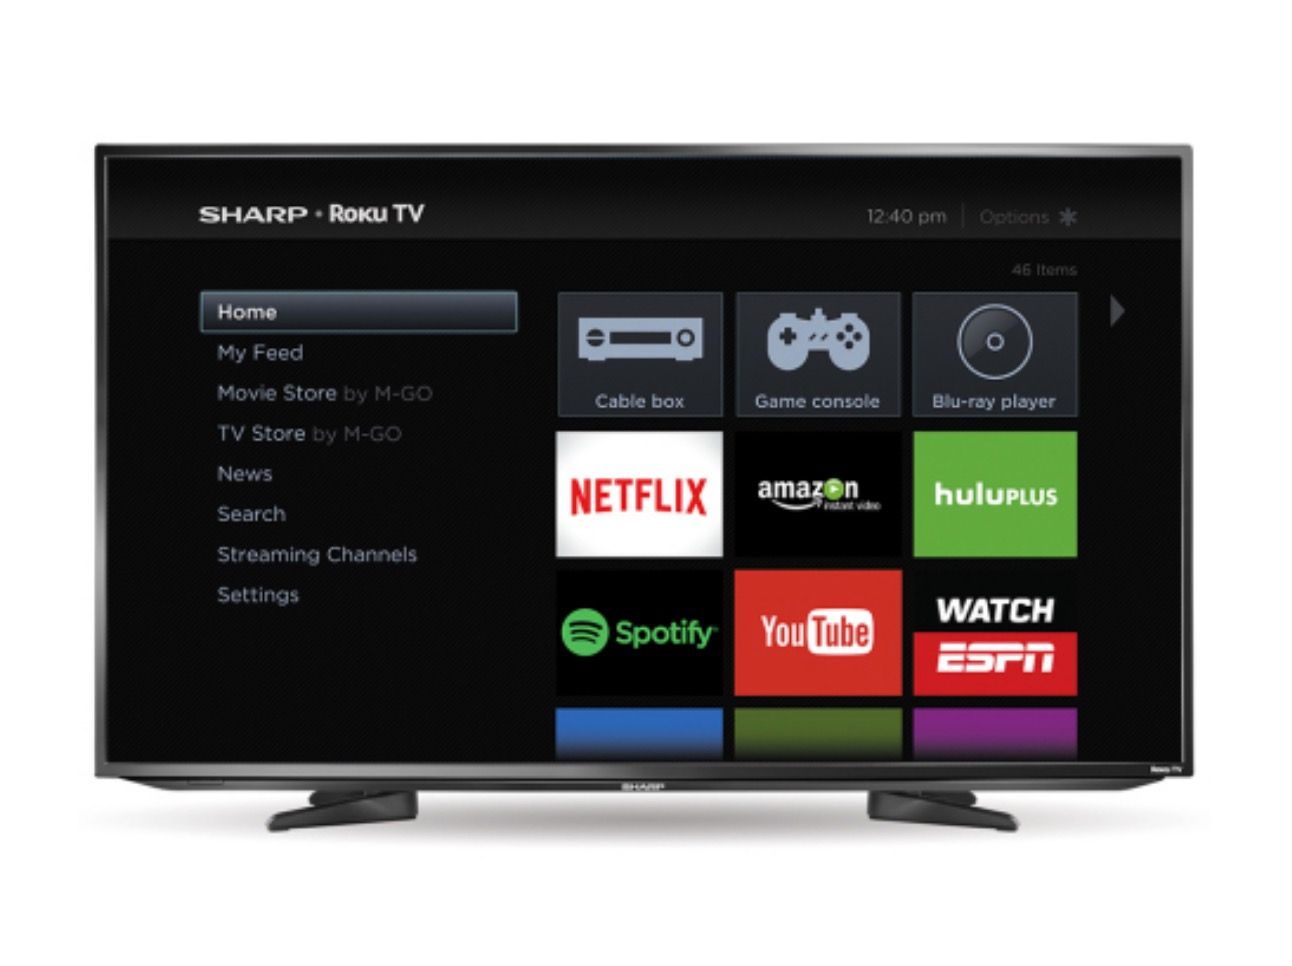 sharp adds roku to smart tvs here are 3 other tvs with built in roku image 1